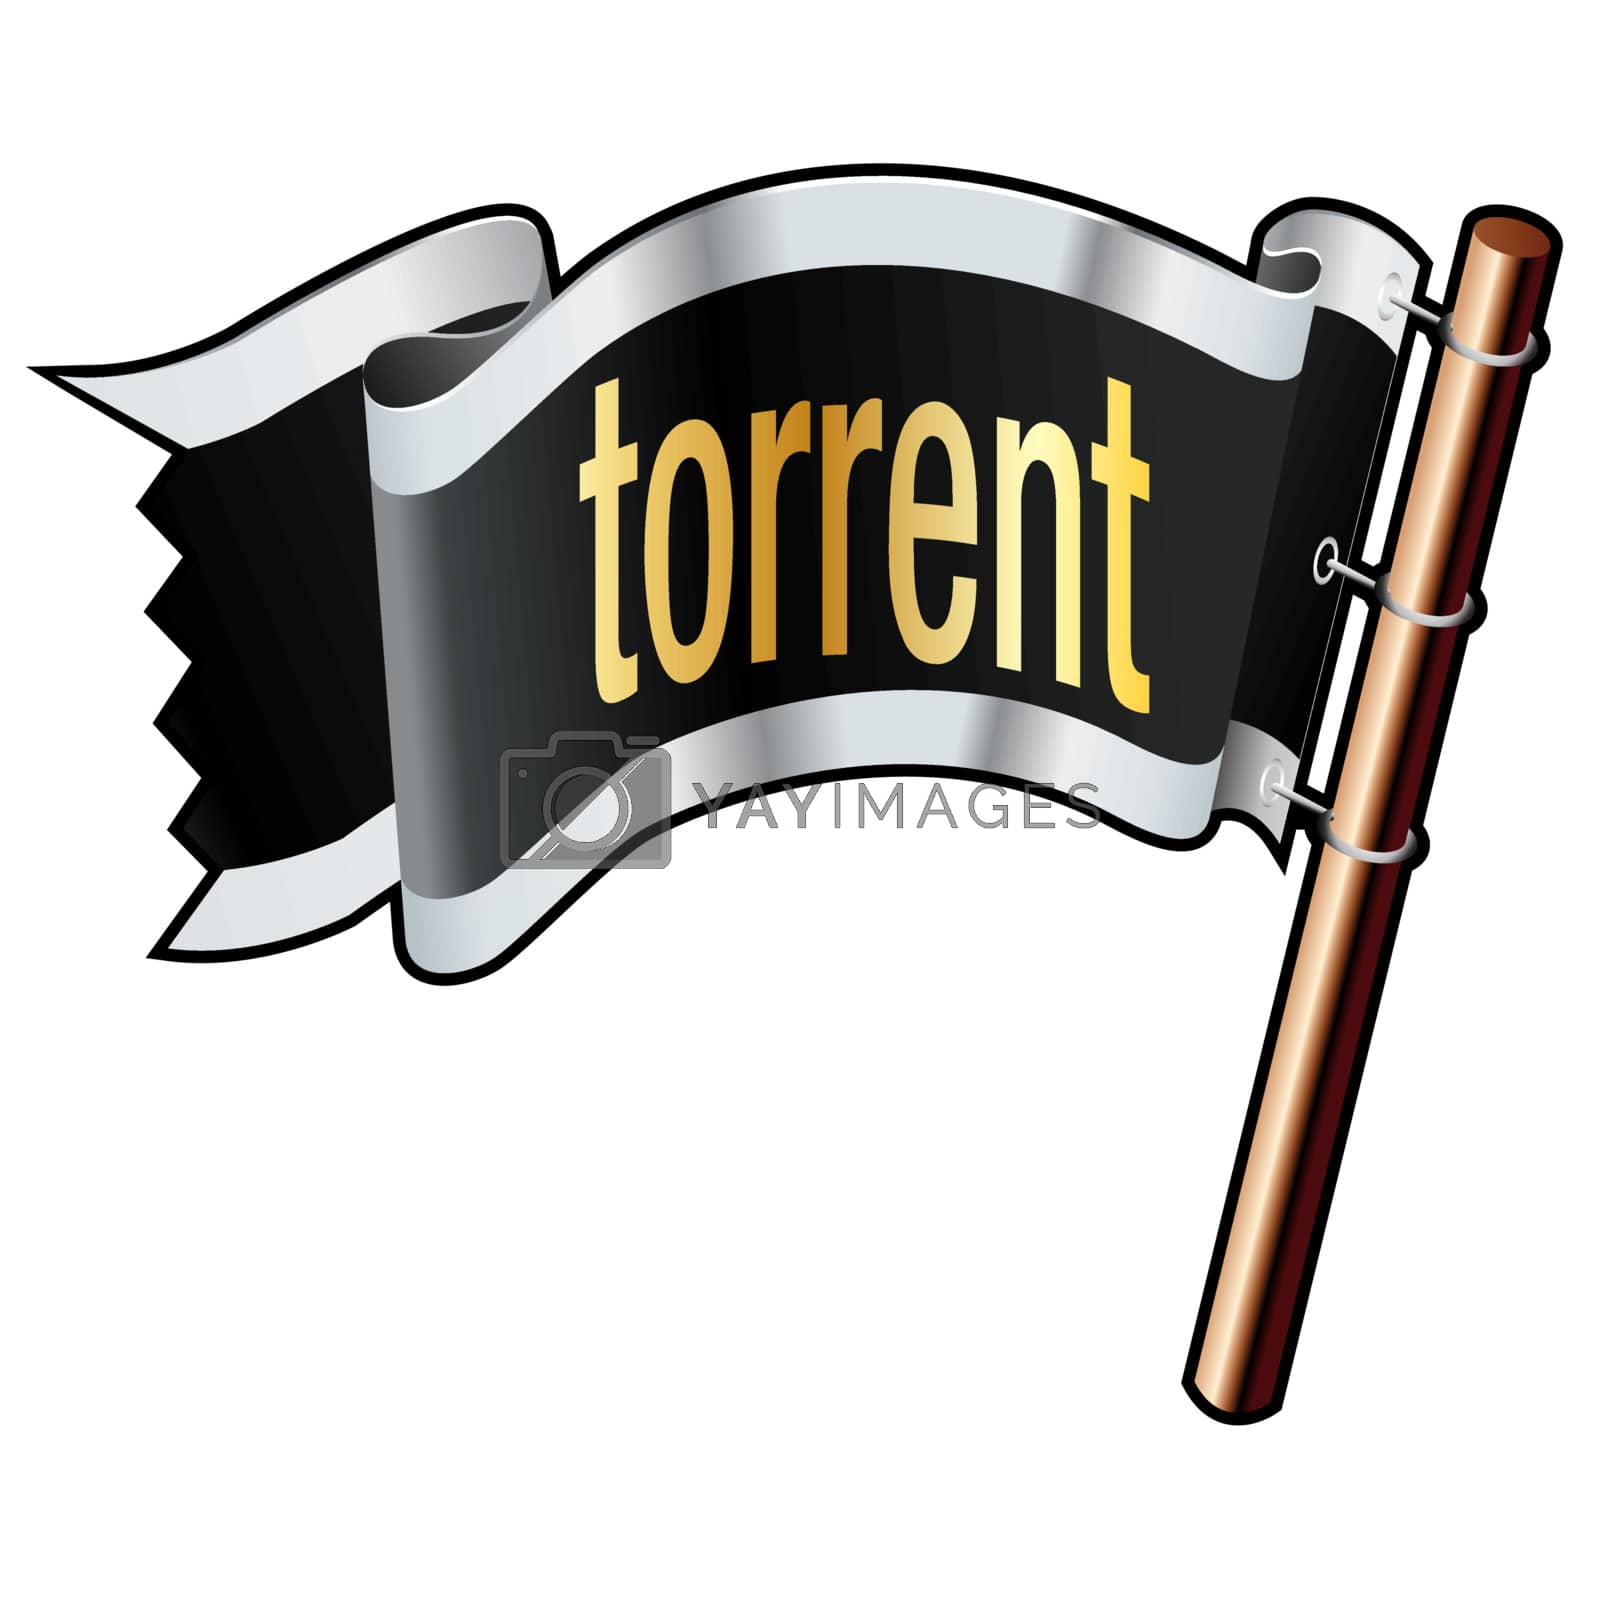 Royalty free image of Torrent pirate flag by lhfgraphics